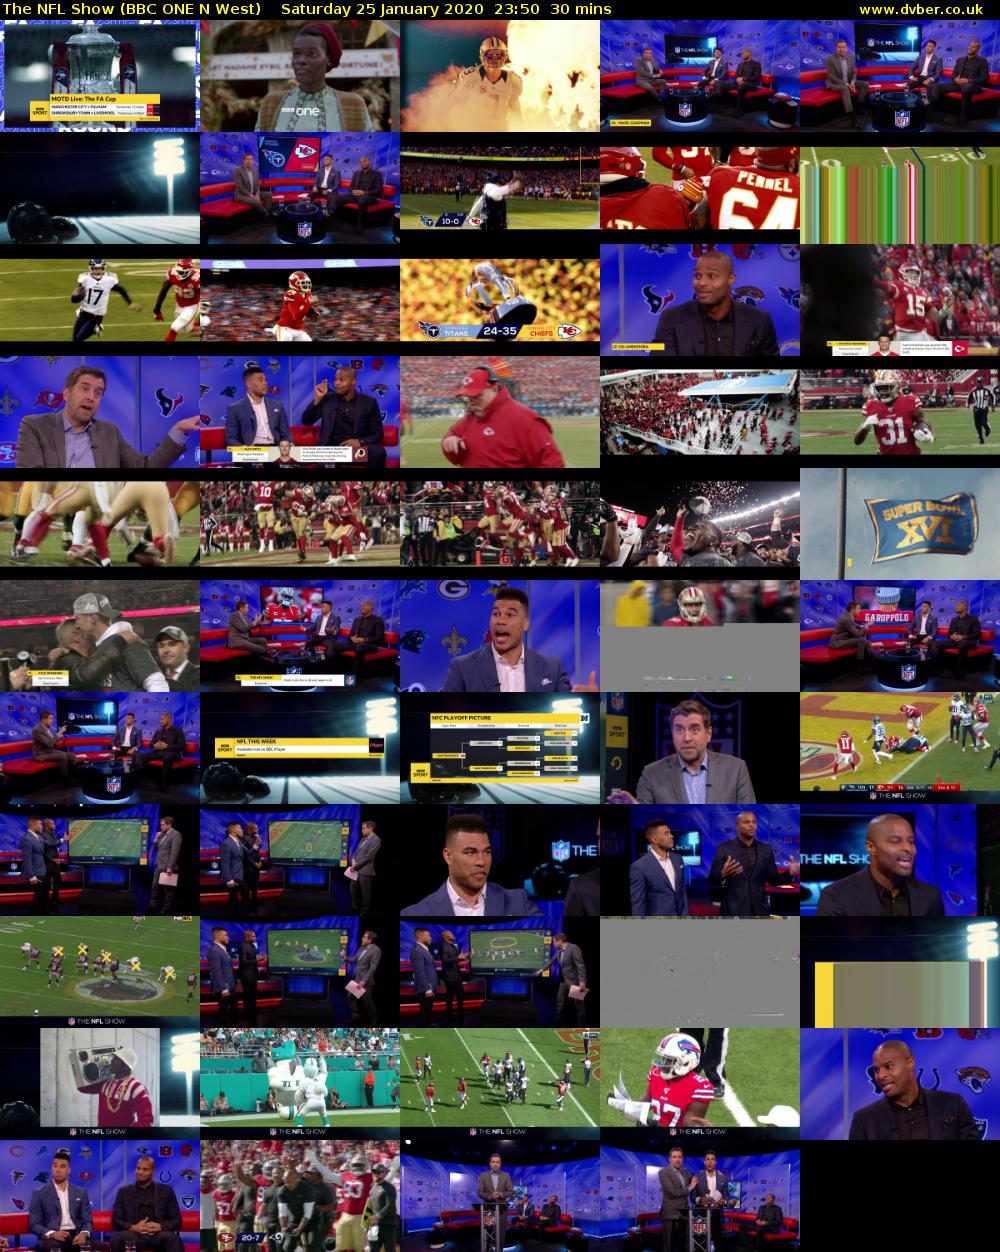 The NFL Show (BBC ONE N West) Saturday 25 January 2020 23:50 - 00:20